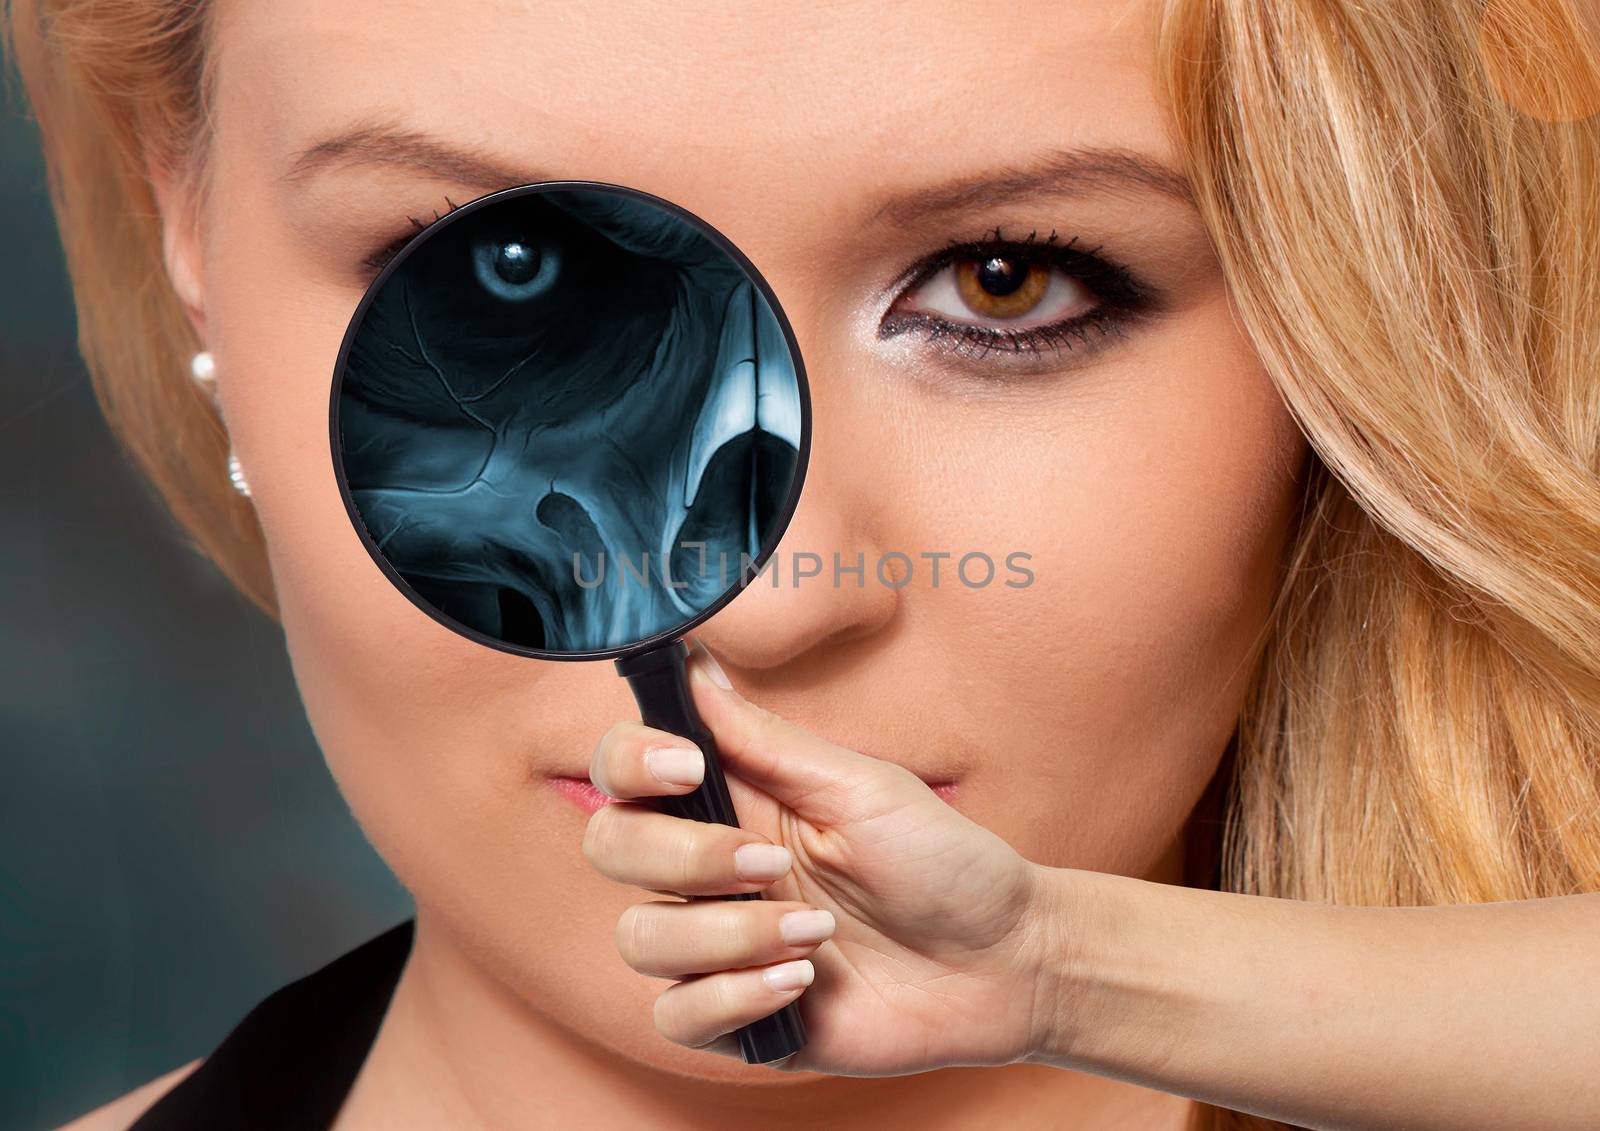 The X-ray with a magnifying glass from the face part of a human, the human eye